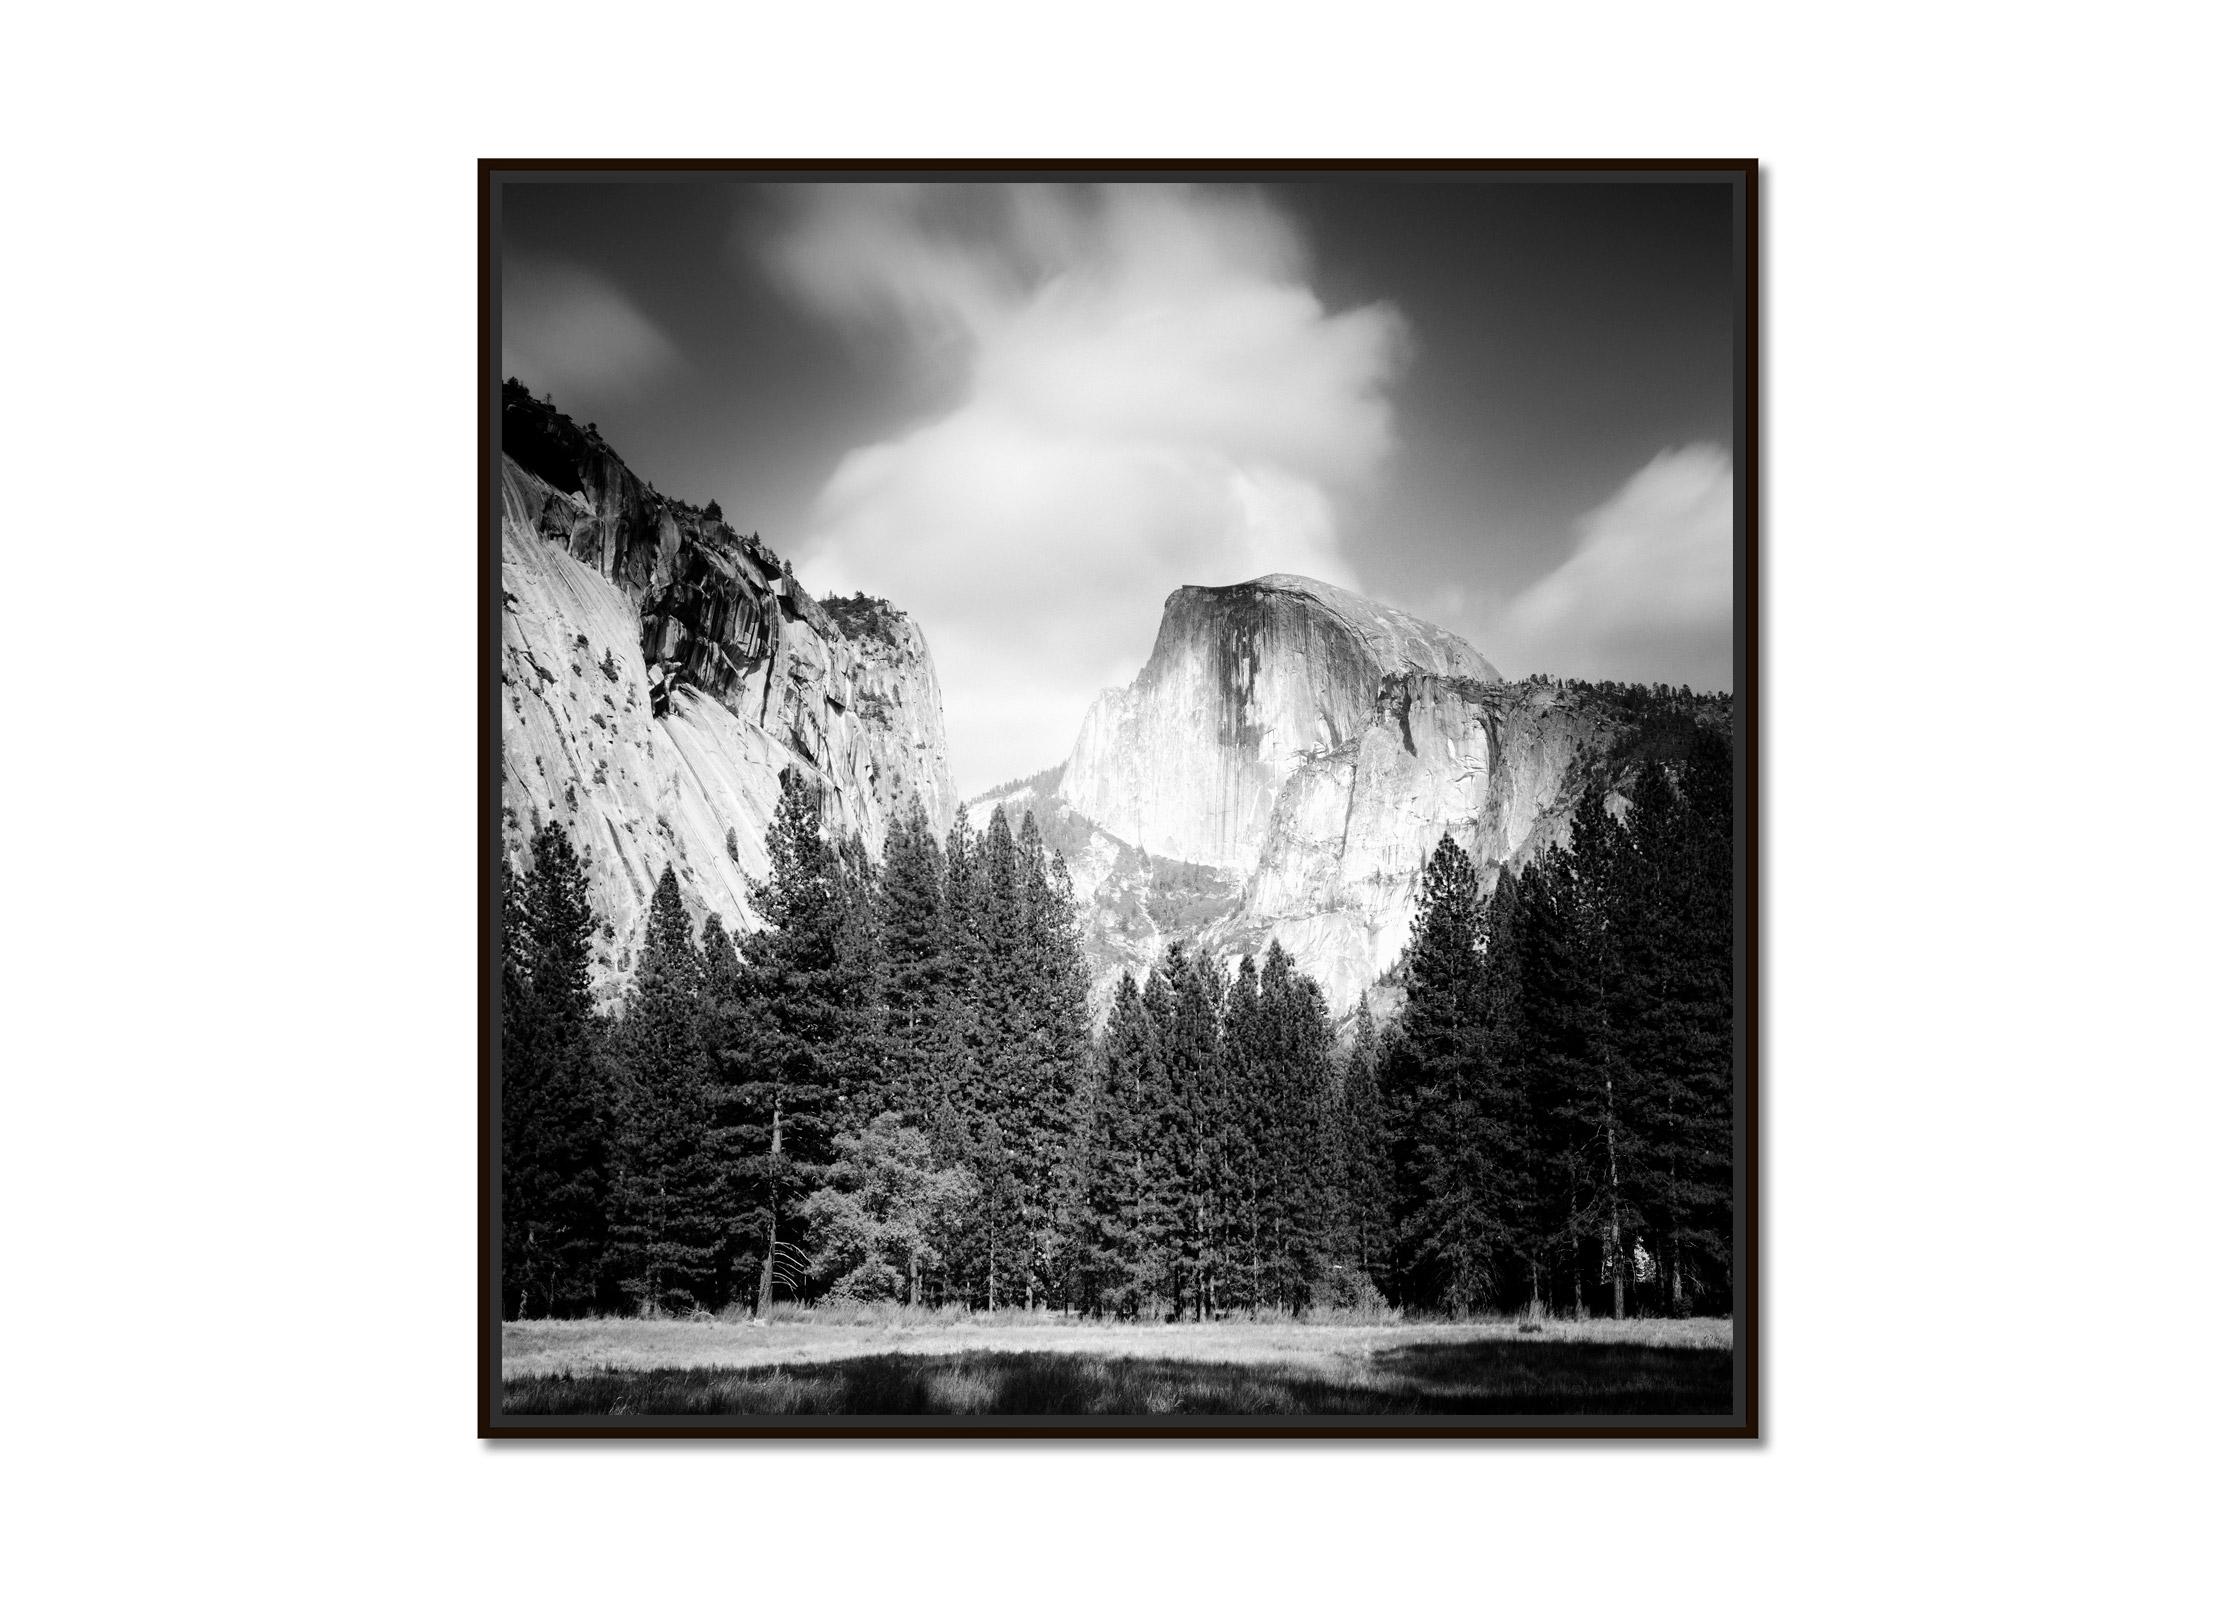 Half Dome, Yosemite National Park, USA, black and white landscape photography - Photograph by Gerald Berghammer